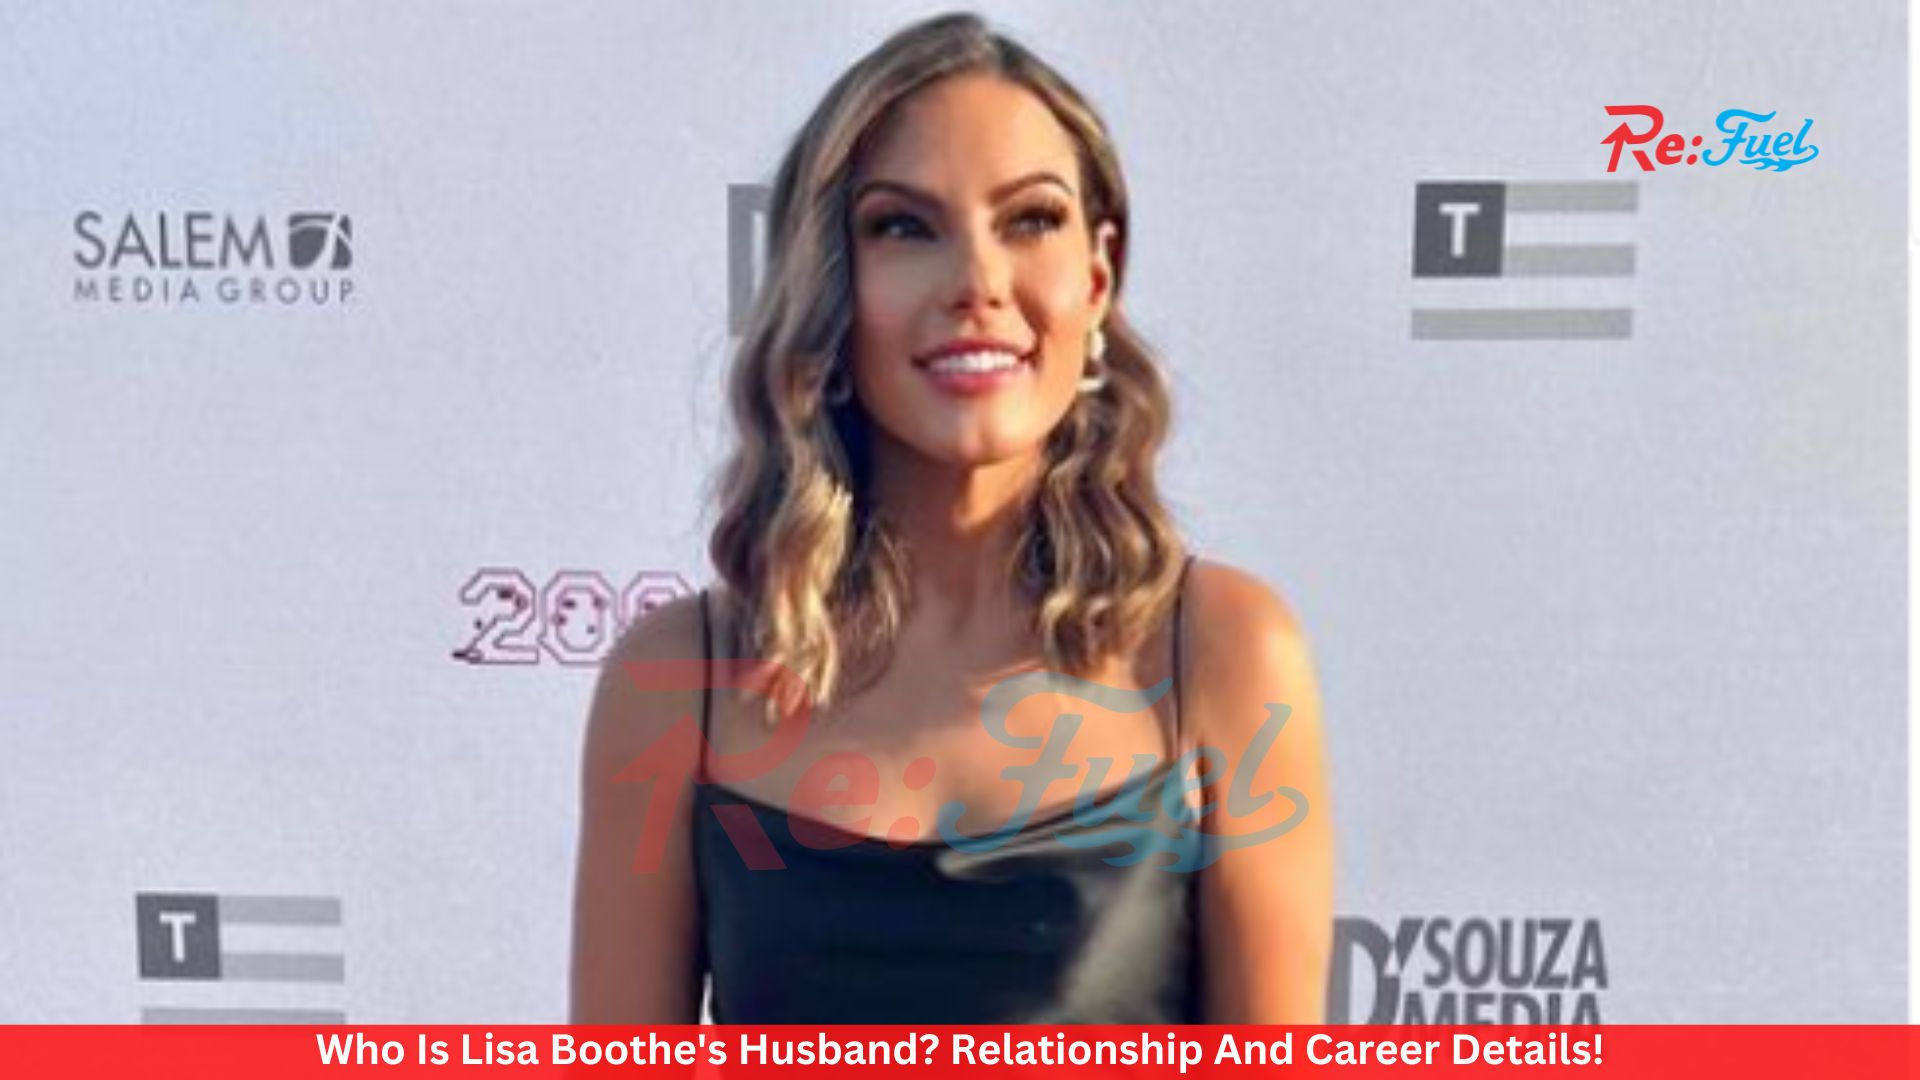 Who Is Lisa Boothe's Husband? Relationship And Career Details!